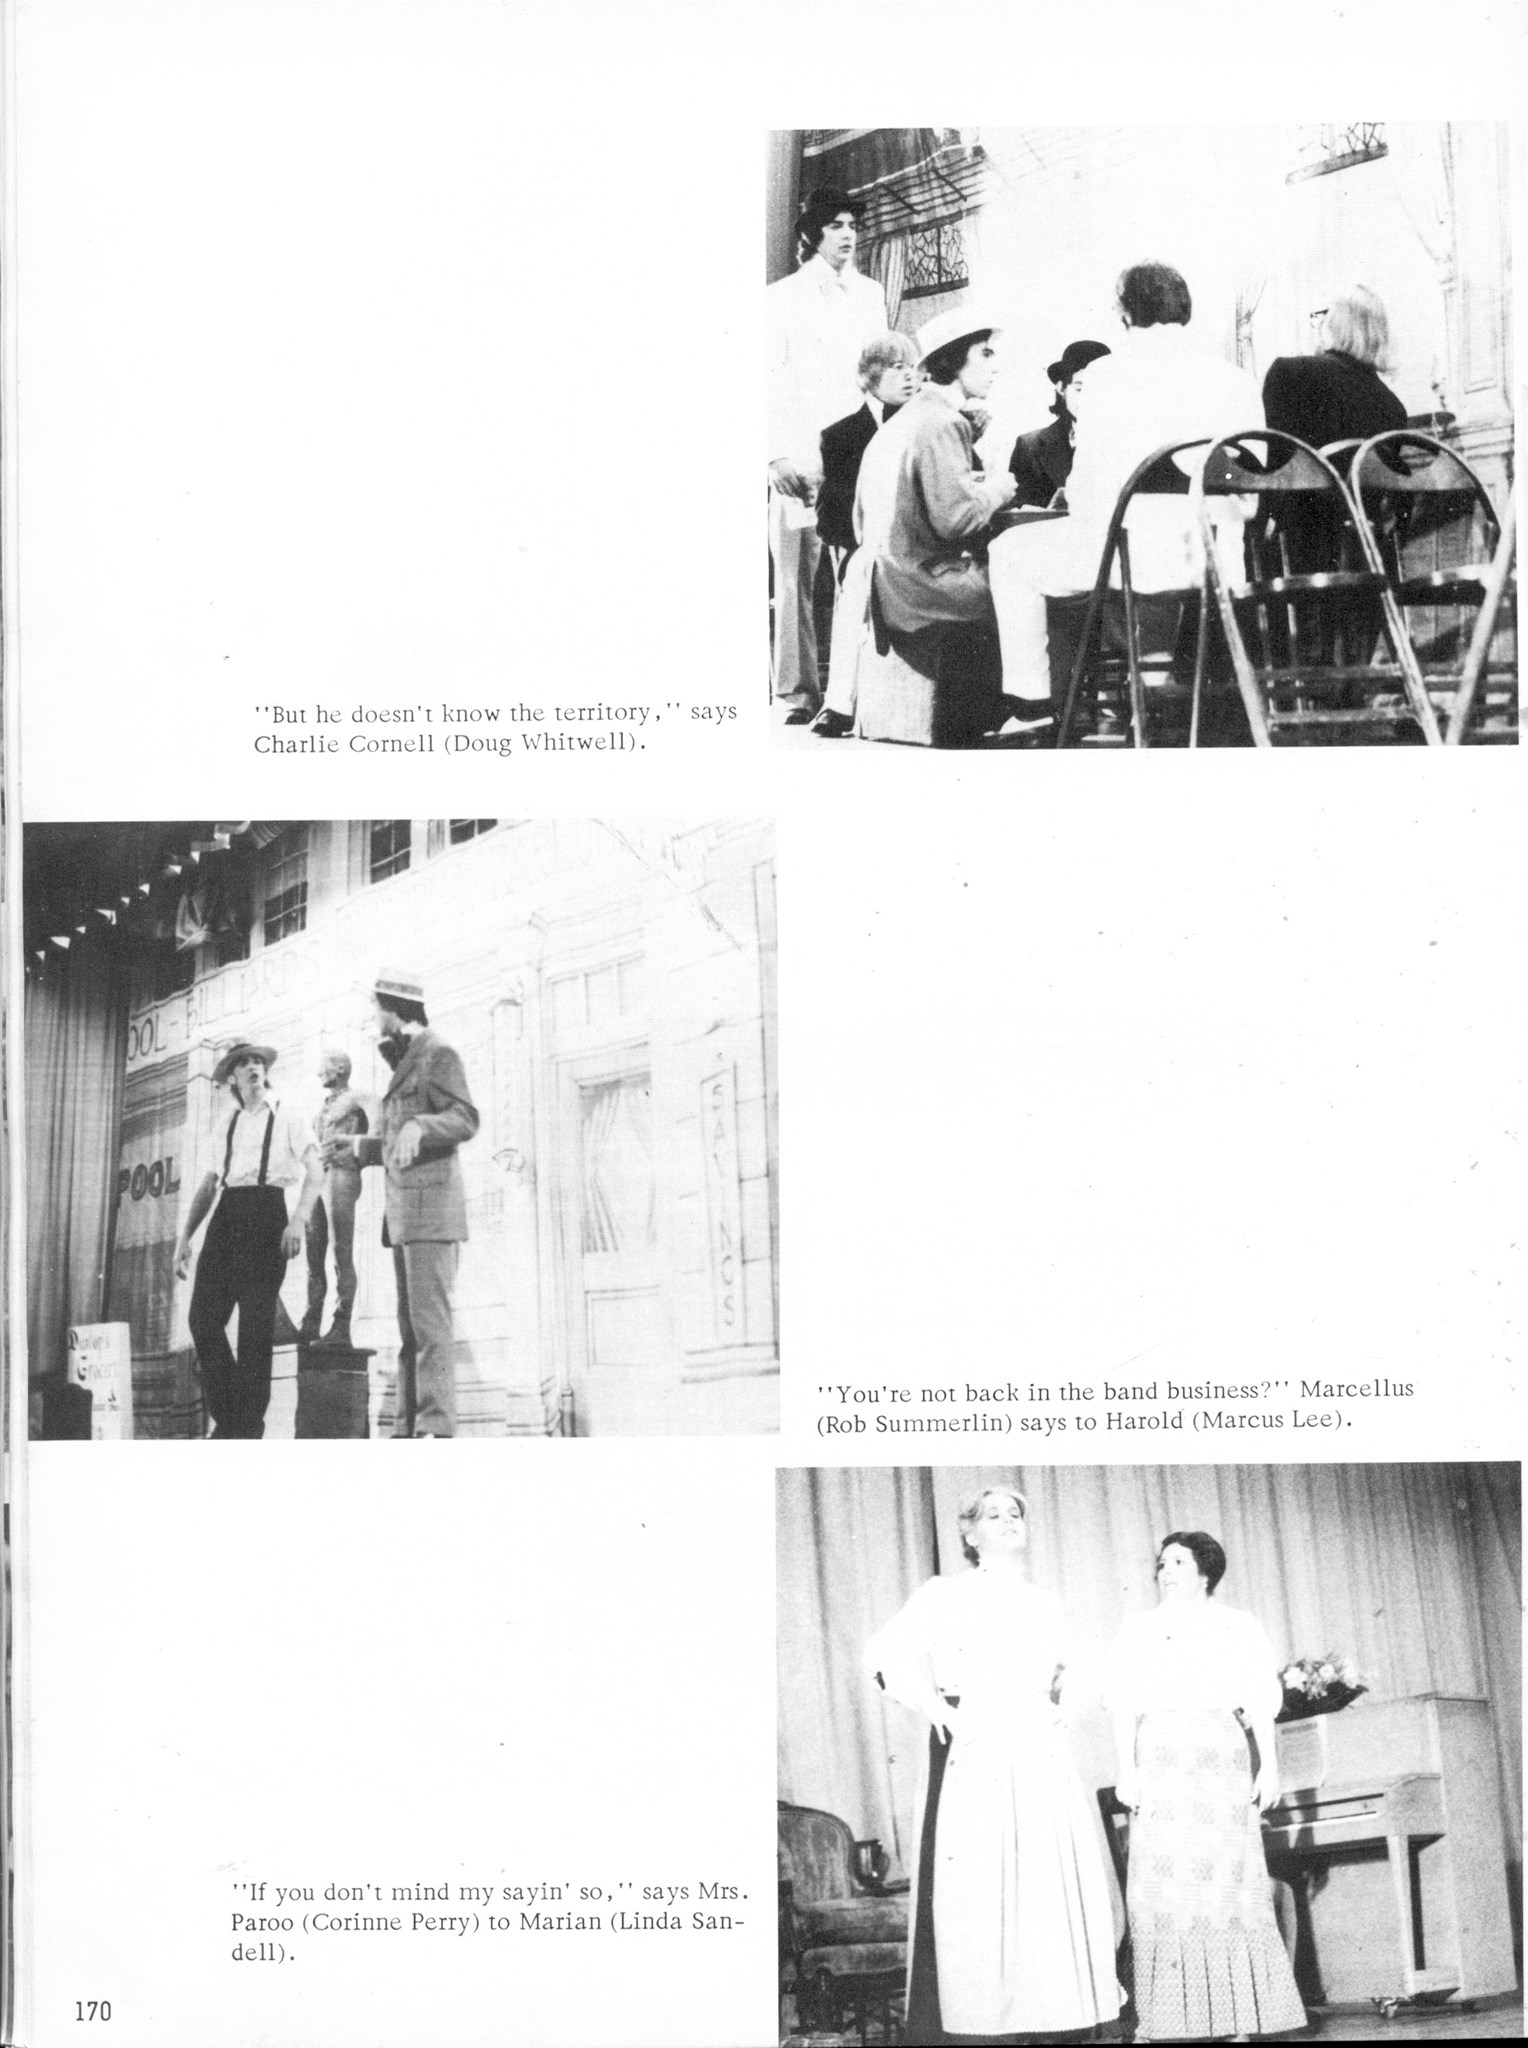 ../../../Images/Large/1976/Arclight-1976-pg0170.jpg